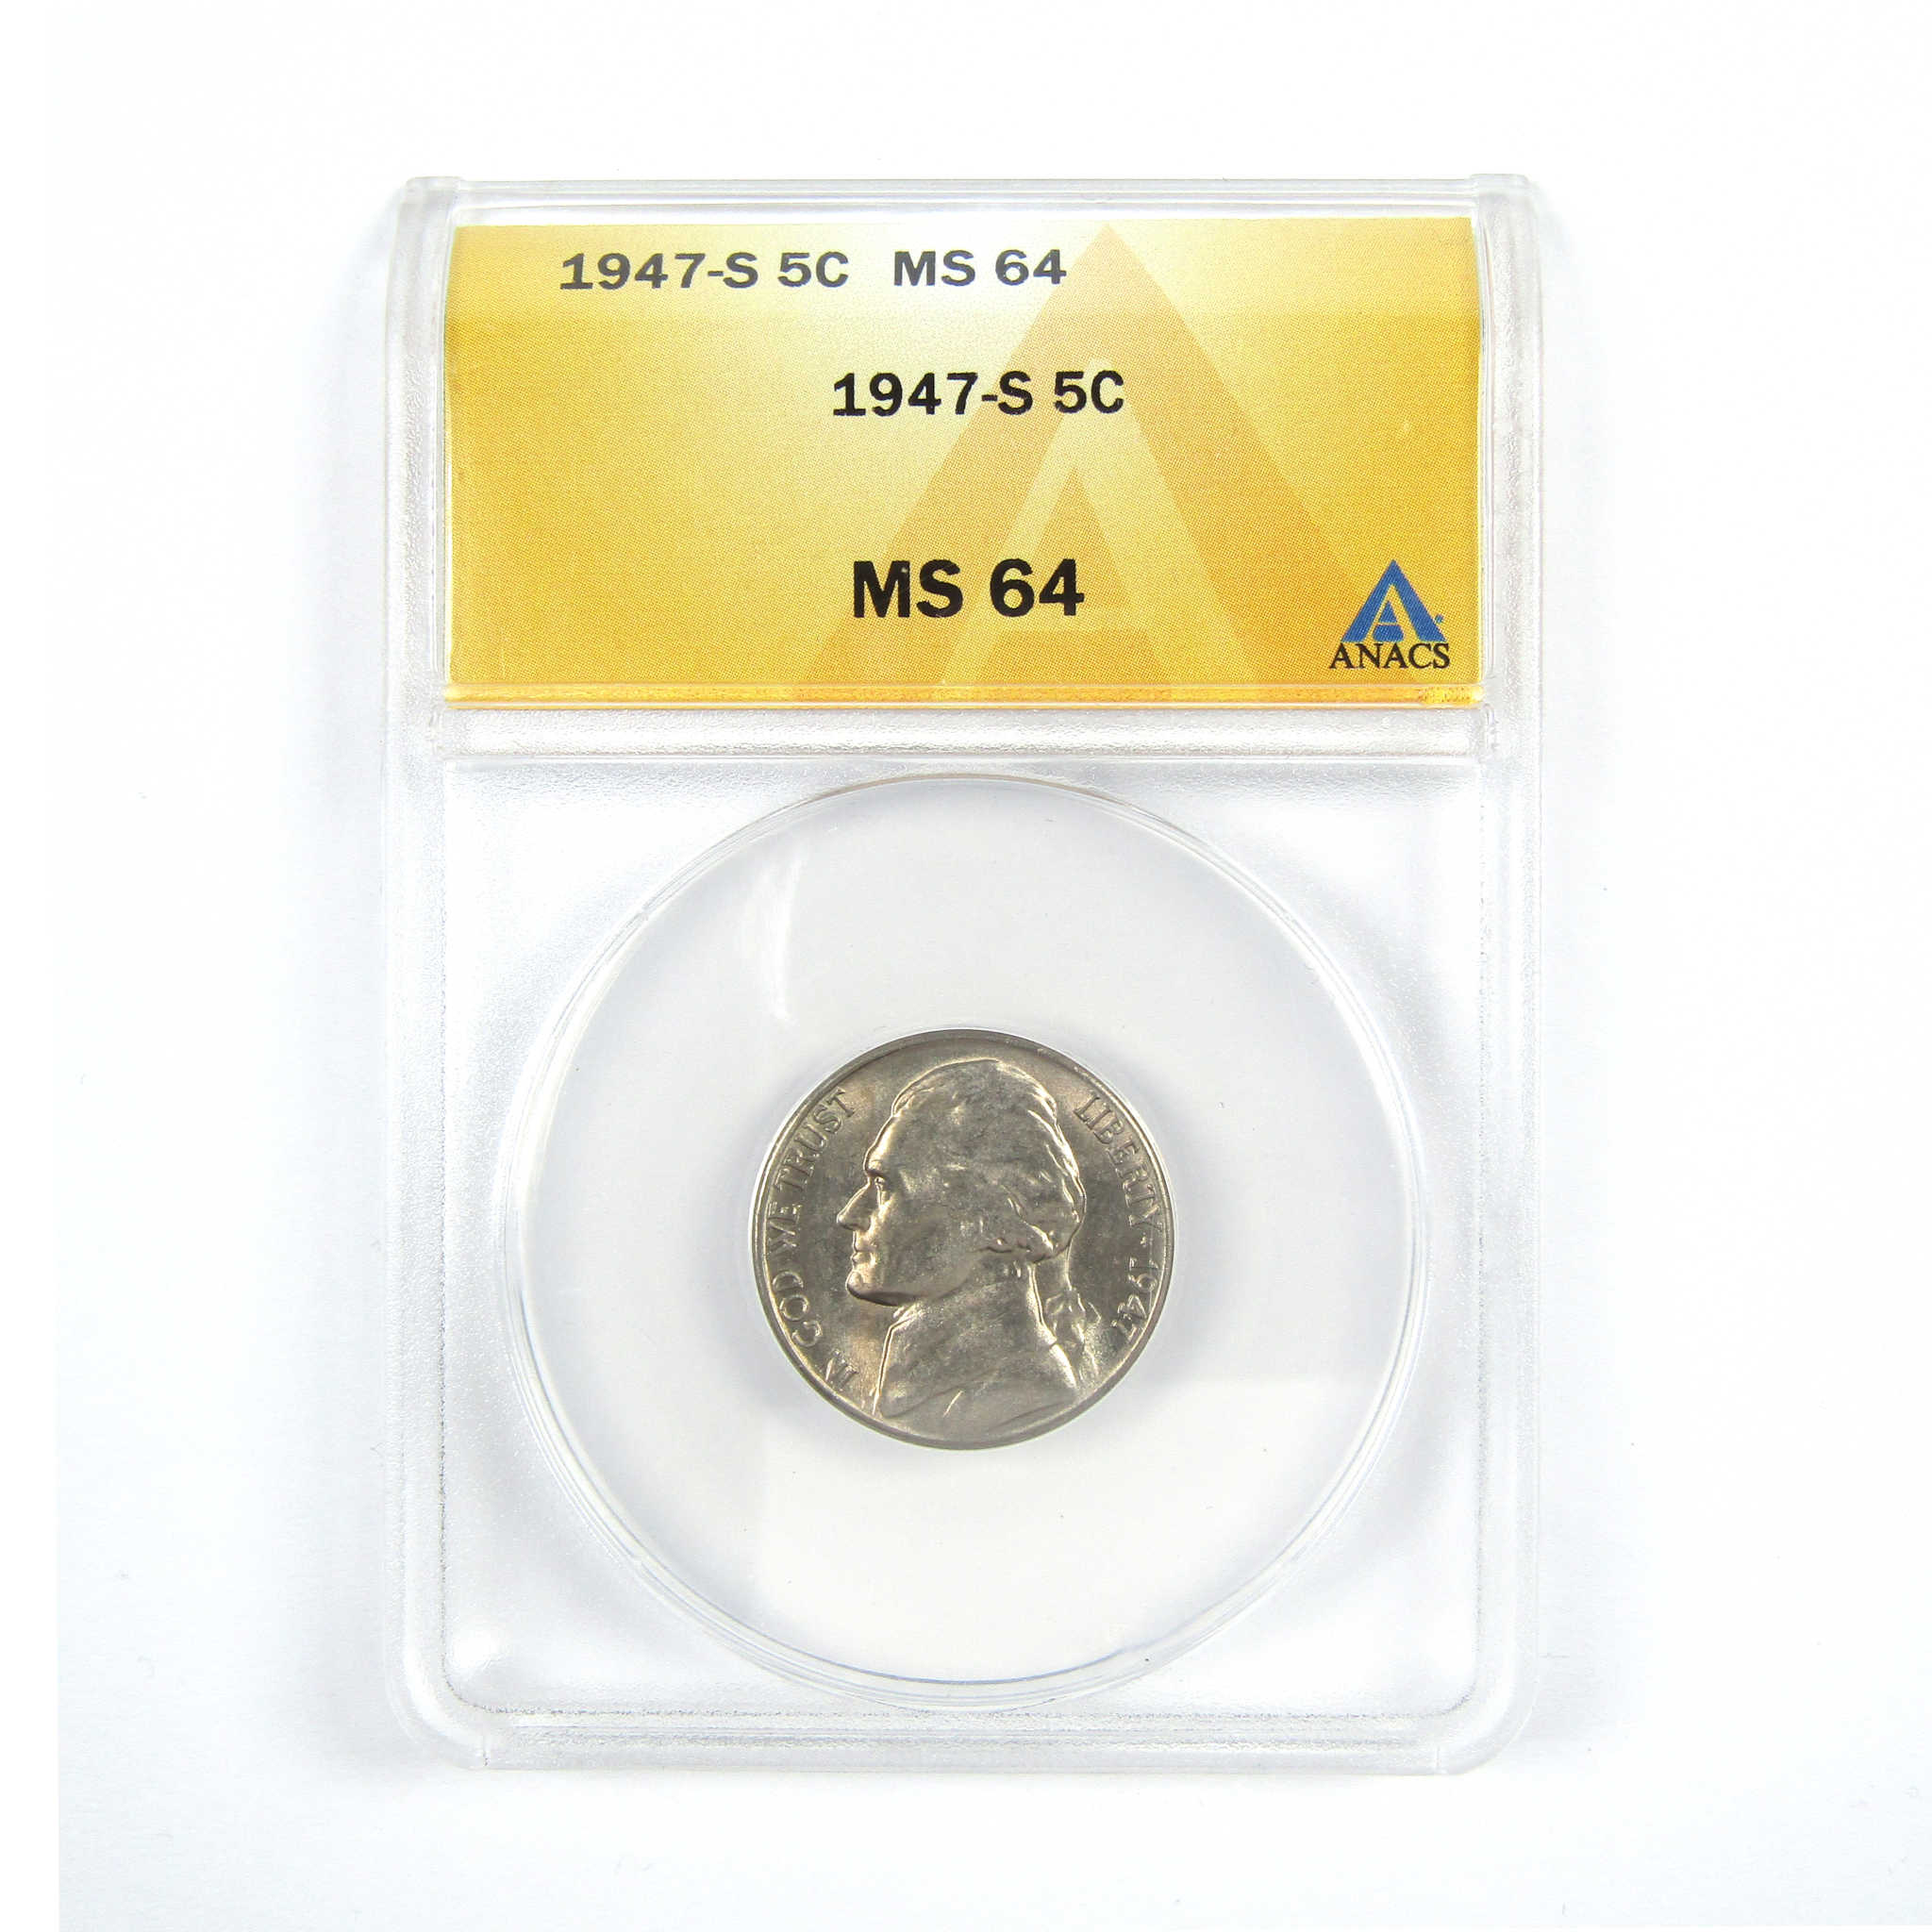 1947 S Jefferson Nickel MS 64 ANACS 5c Uncirculated Coin SKU:CPC5192